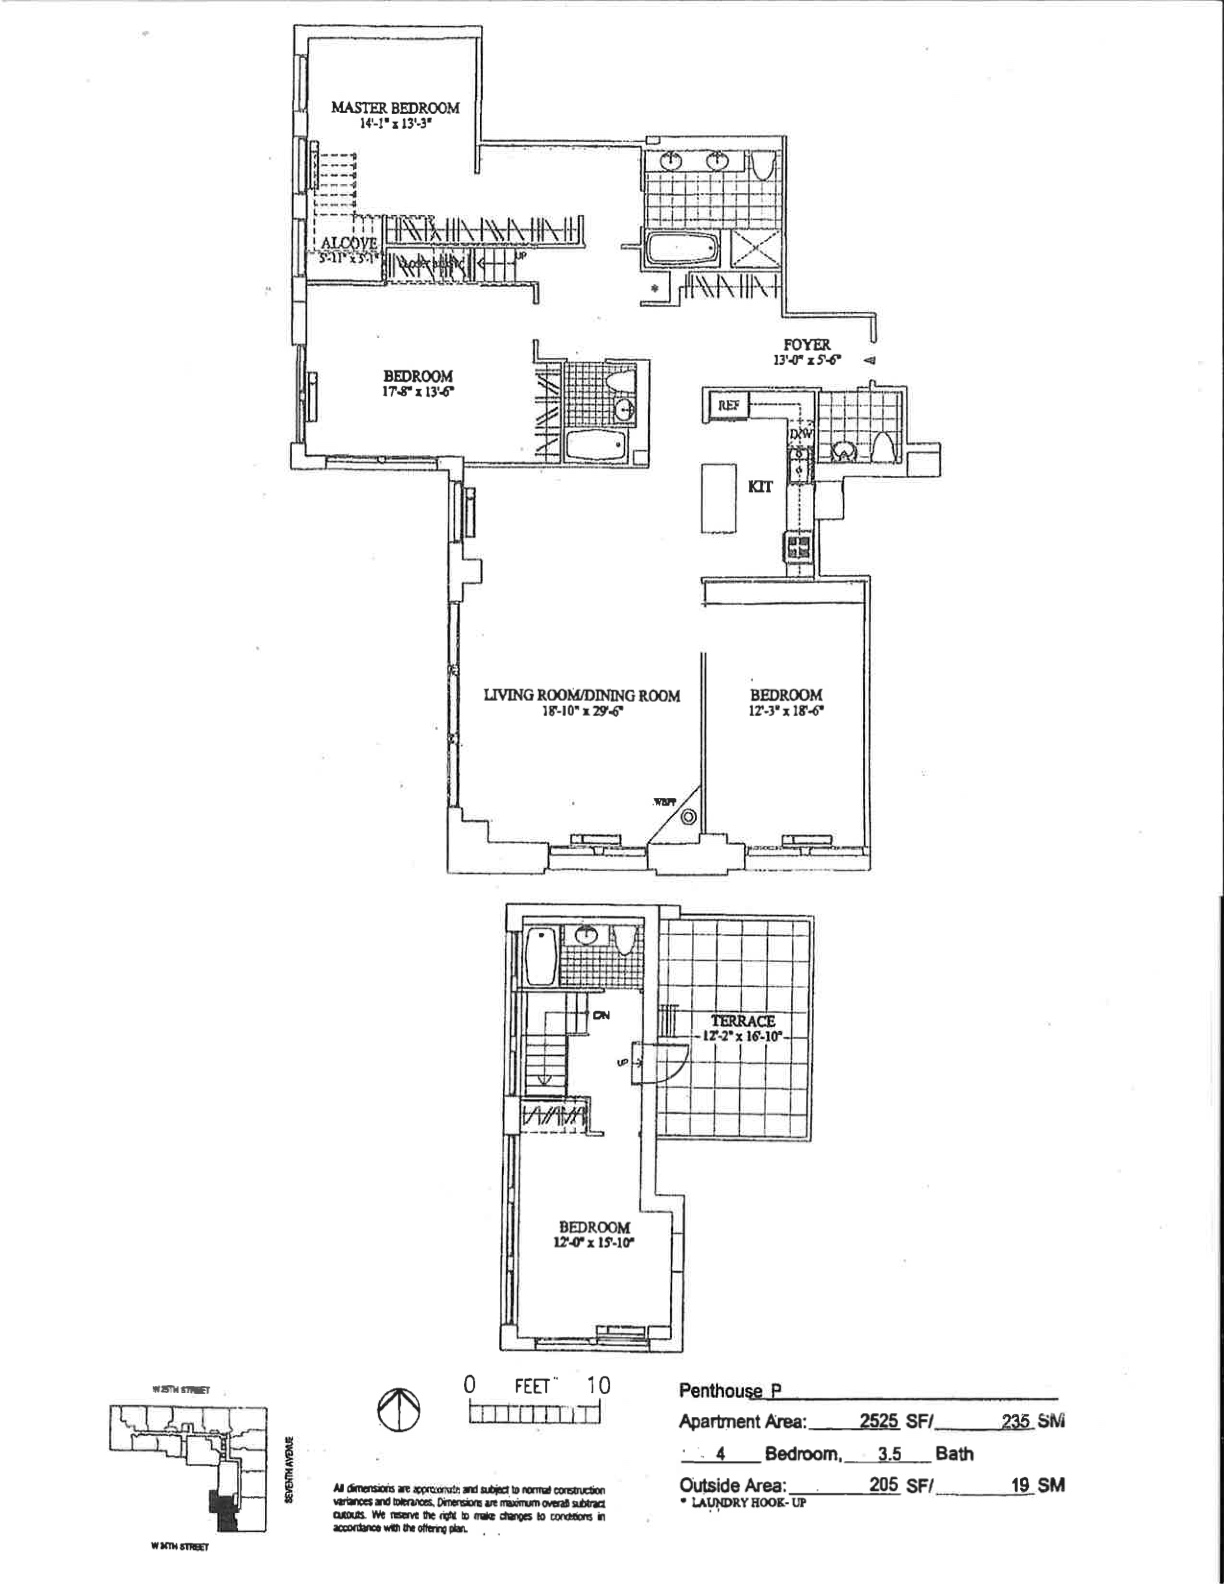 Floorplan for 252 7th Avenue, PHP